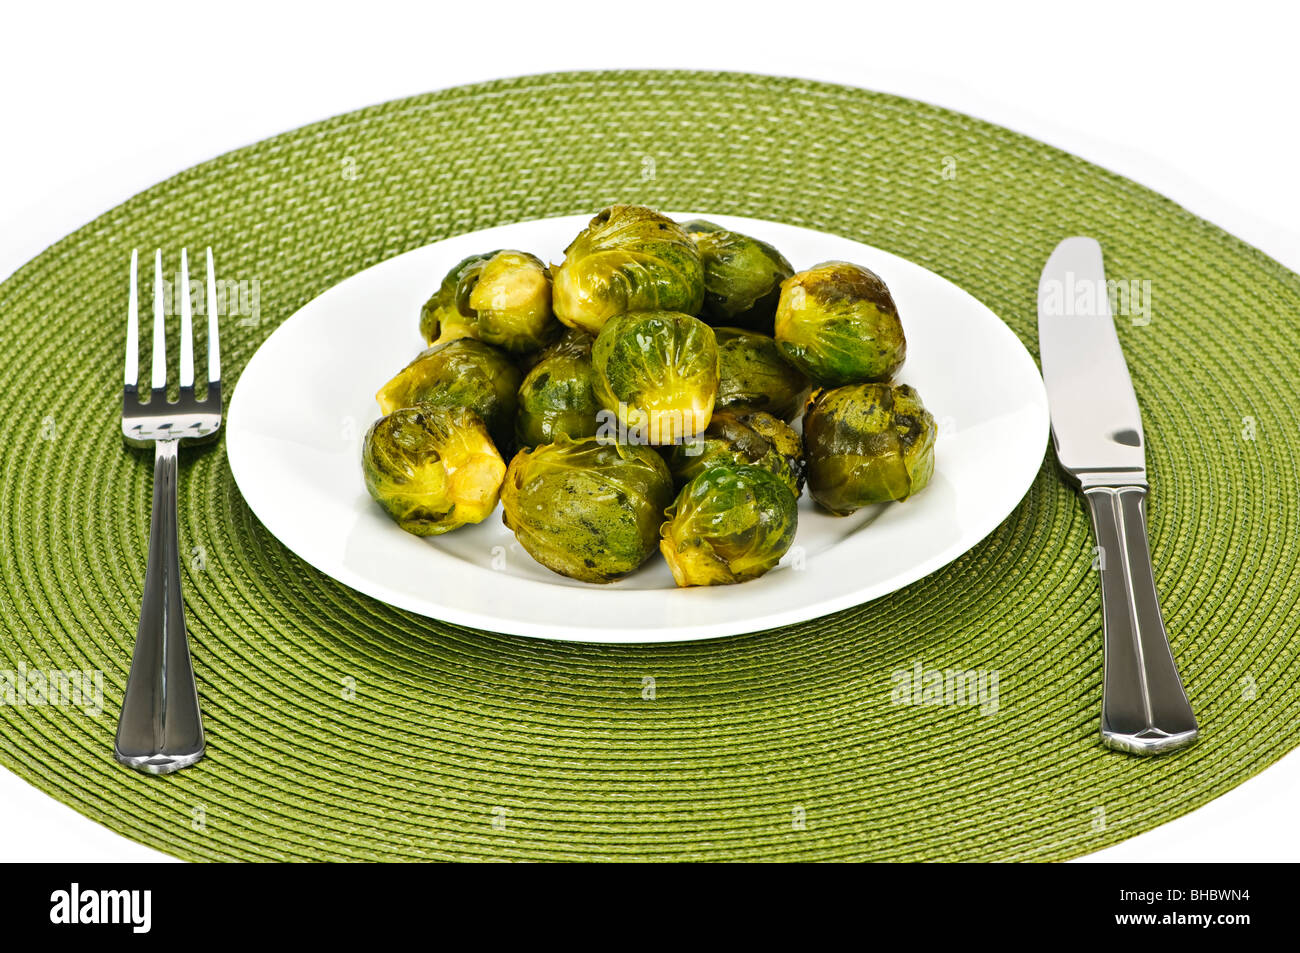 Plate of green brussels sprouts with knife and fork Stock Photo